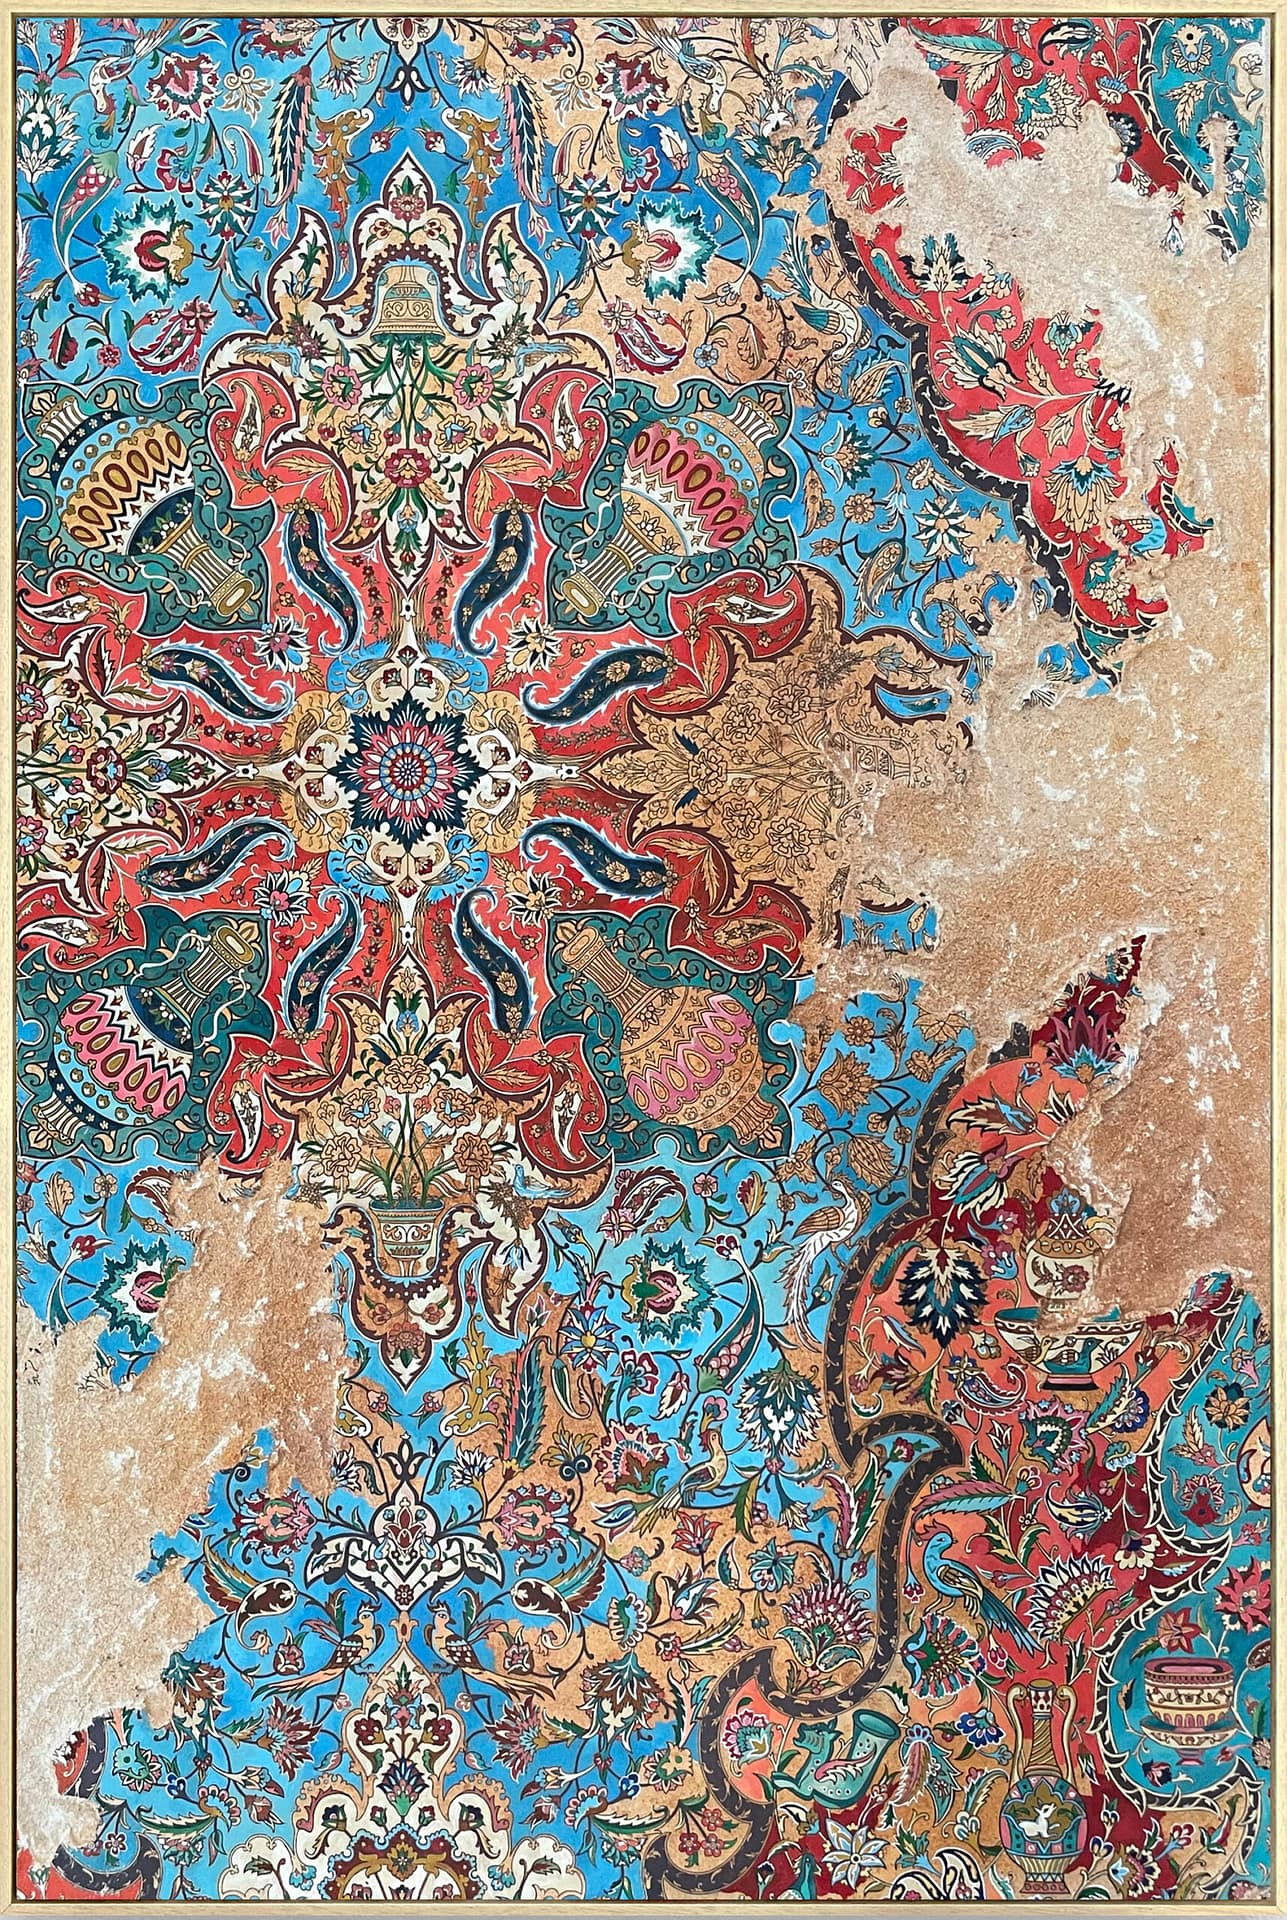 Persian Carpets Merge With Crumbling Concrete in Jason Seife’s Elaborate Paintings